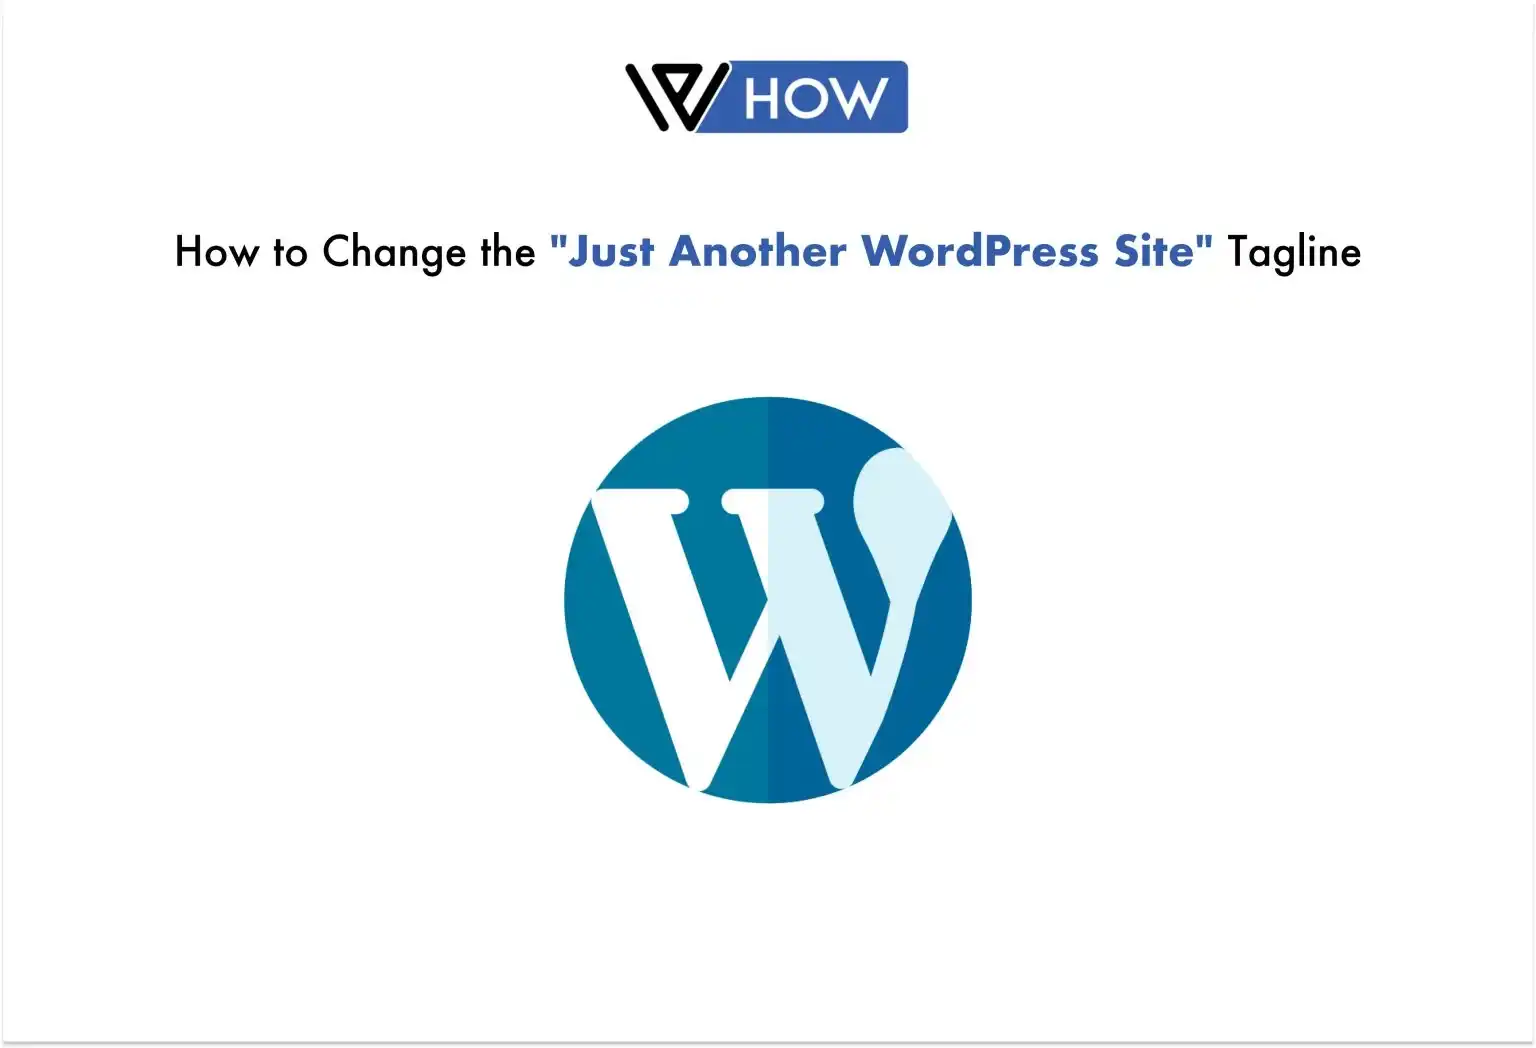 How to Change the Just Another WordPress Site Tagline - Title Image